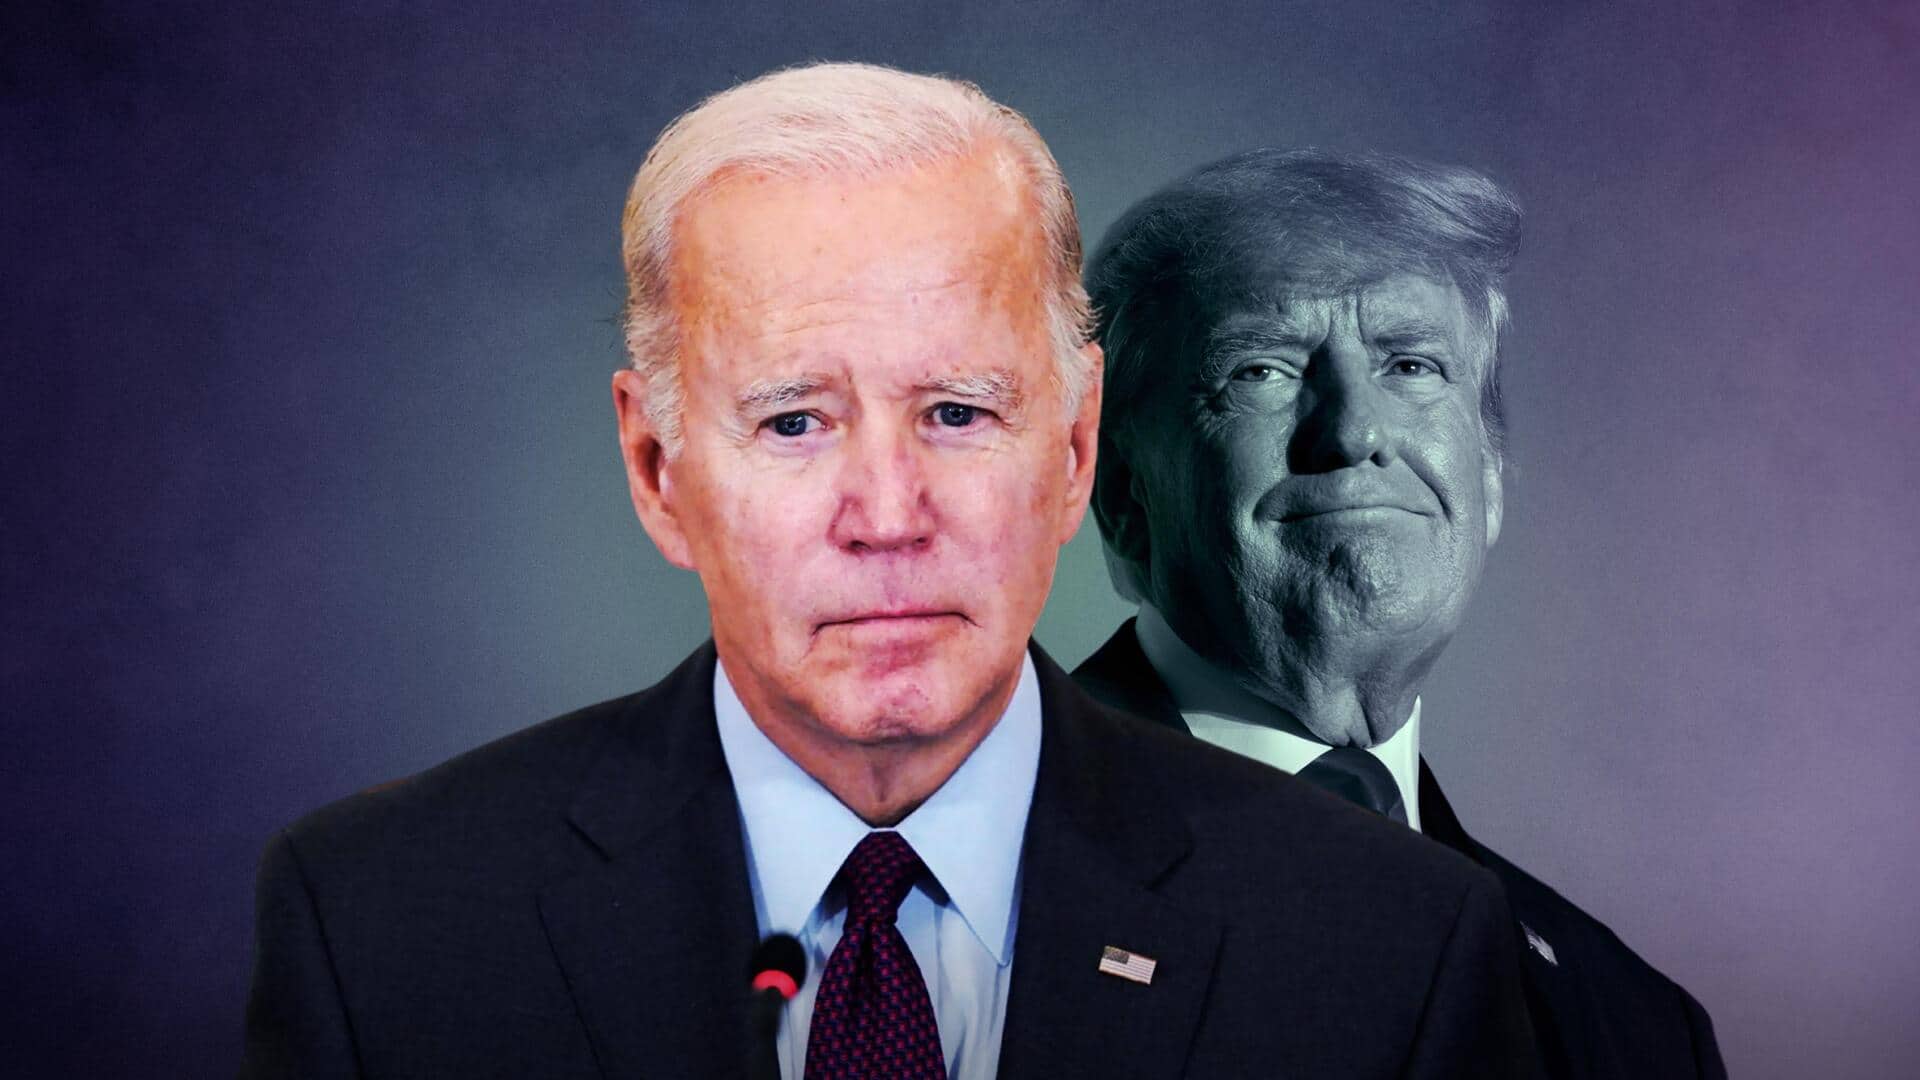 'Super Tuesday': Trump, Biden projected to win several state primaries